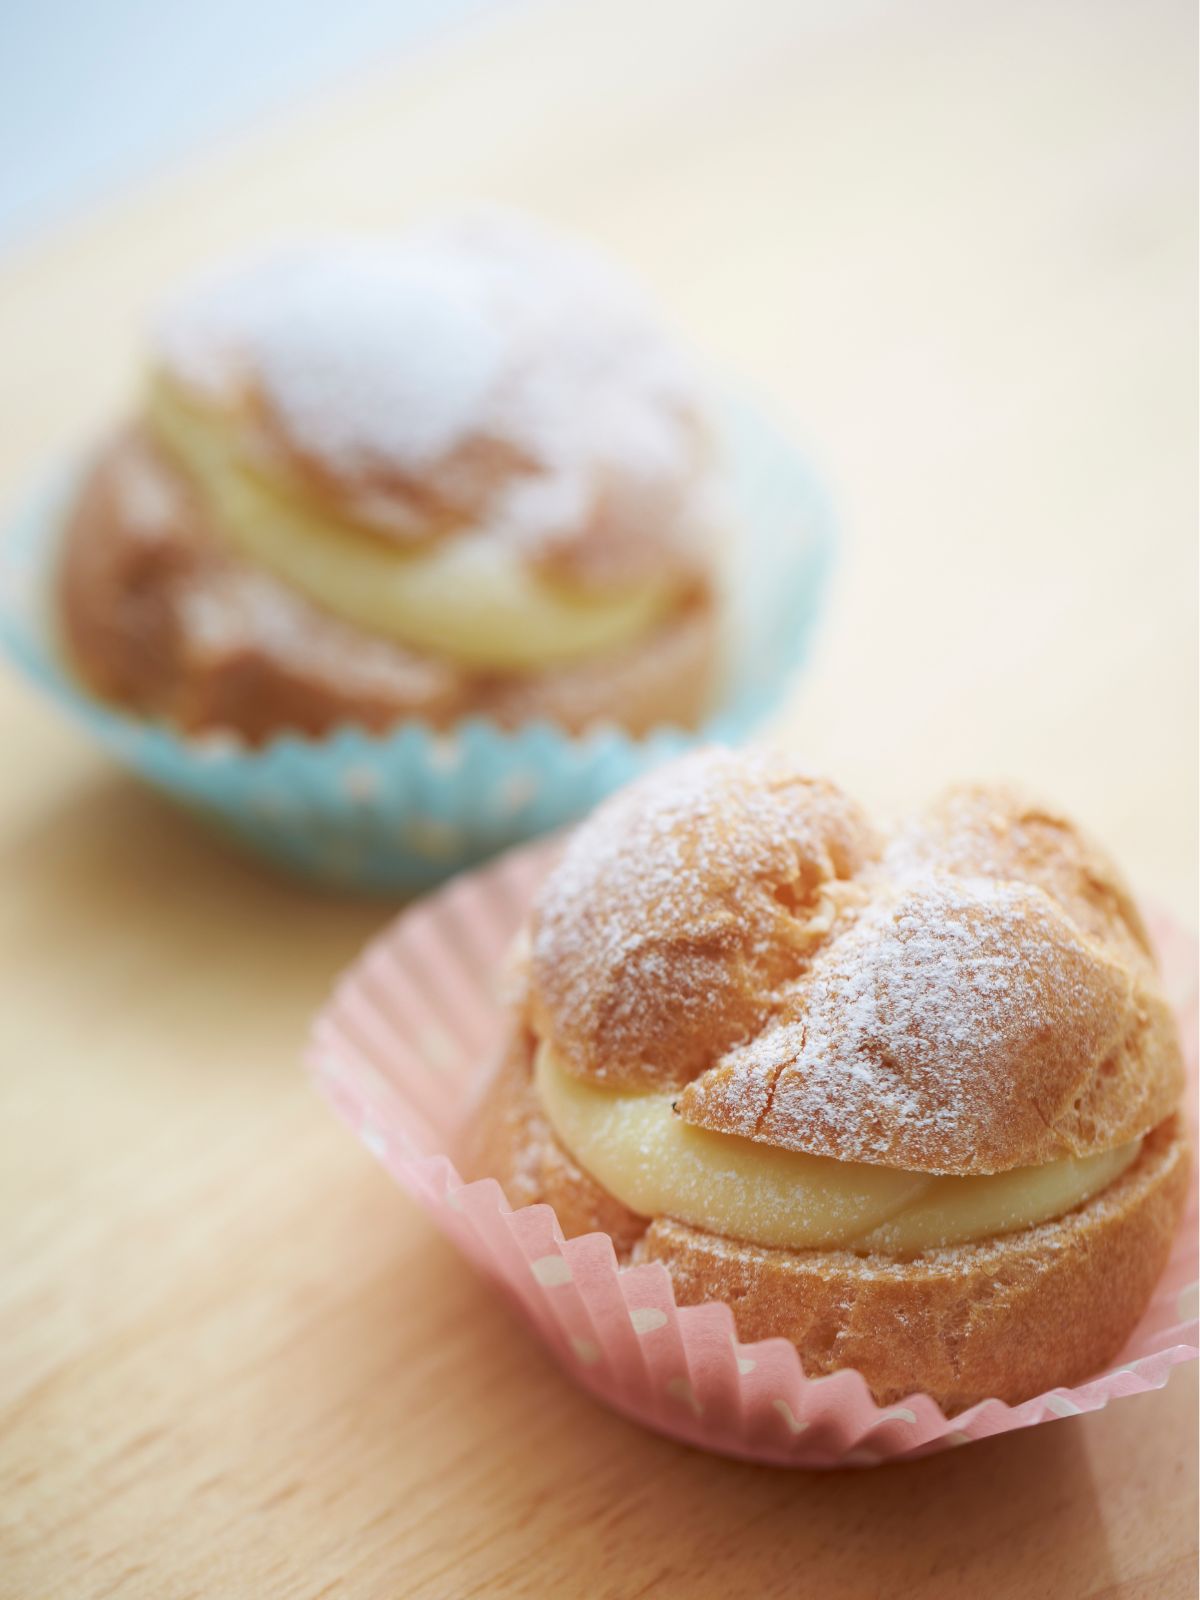 cream puffs ready to serve in paper muffin liners.